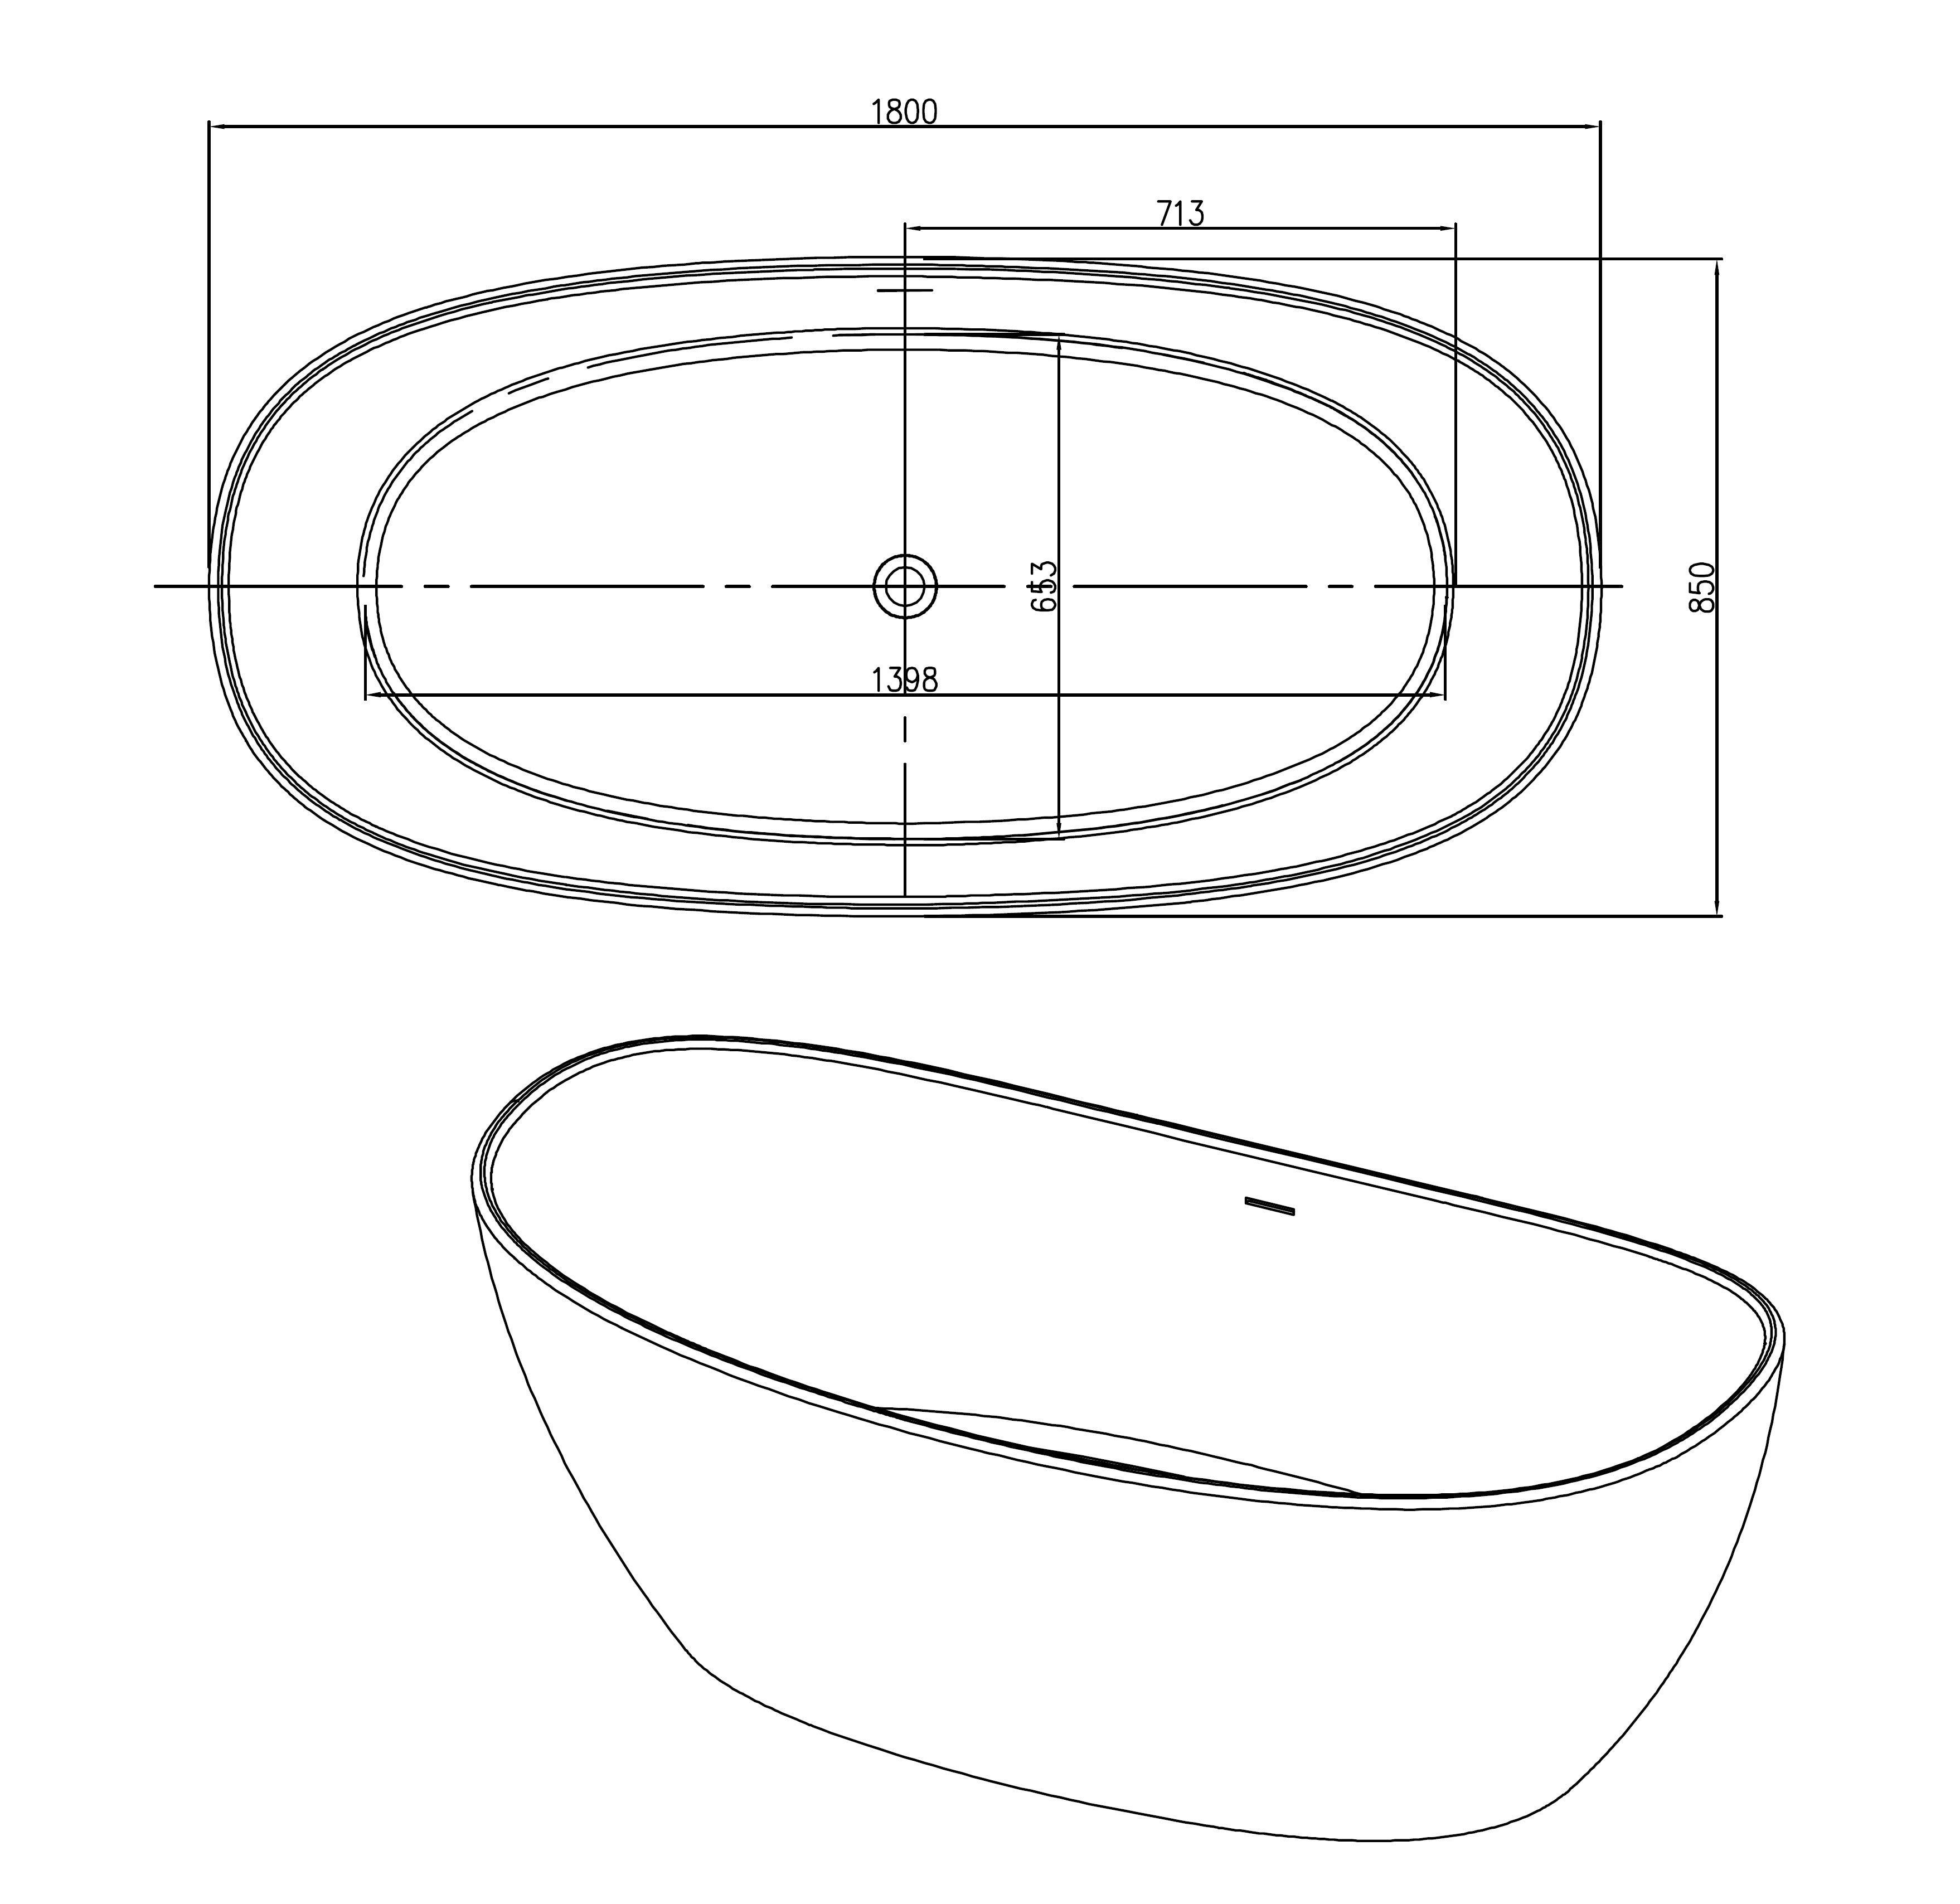 PIETRA BIANCA MARIA FREESTANDING STONE BATHTUB WITH MULTICOLOUR (AVAILABLE IN 1630MM AND 1800MM)